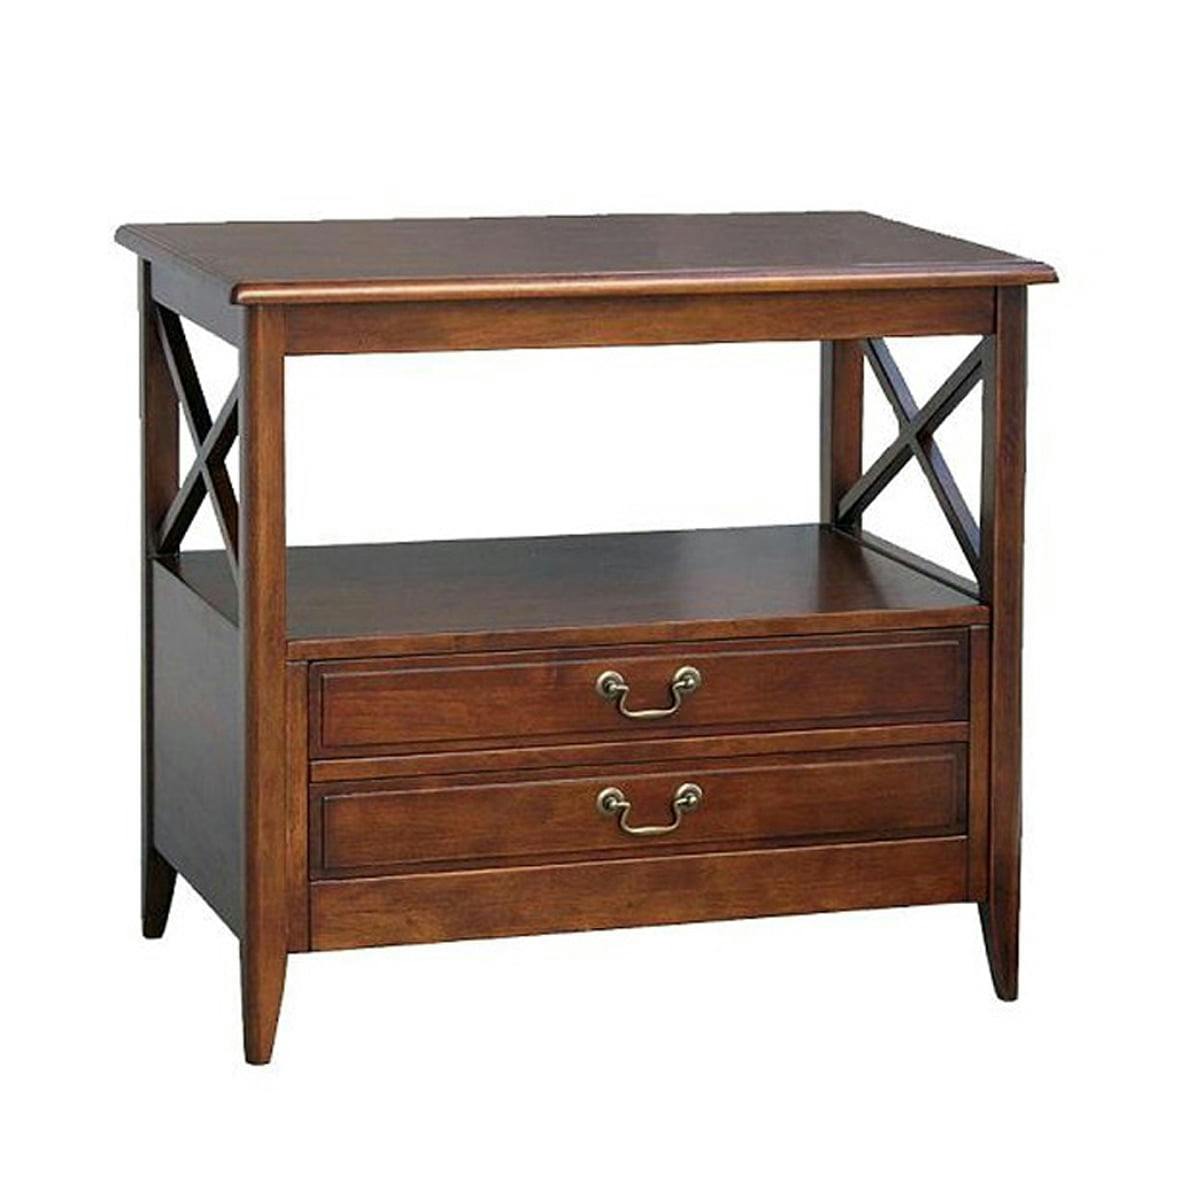 Transitional Oakwood TV Stand with Open Shelf and Dual Drawers, Dark Brown